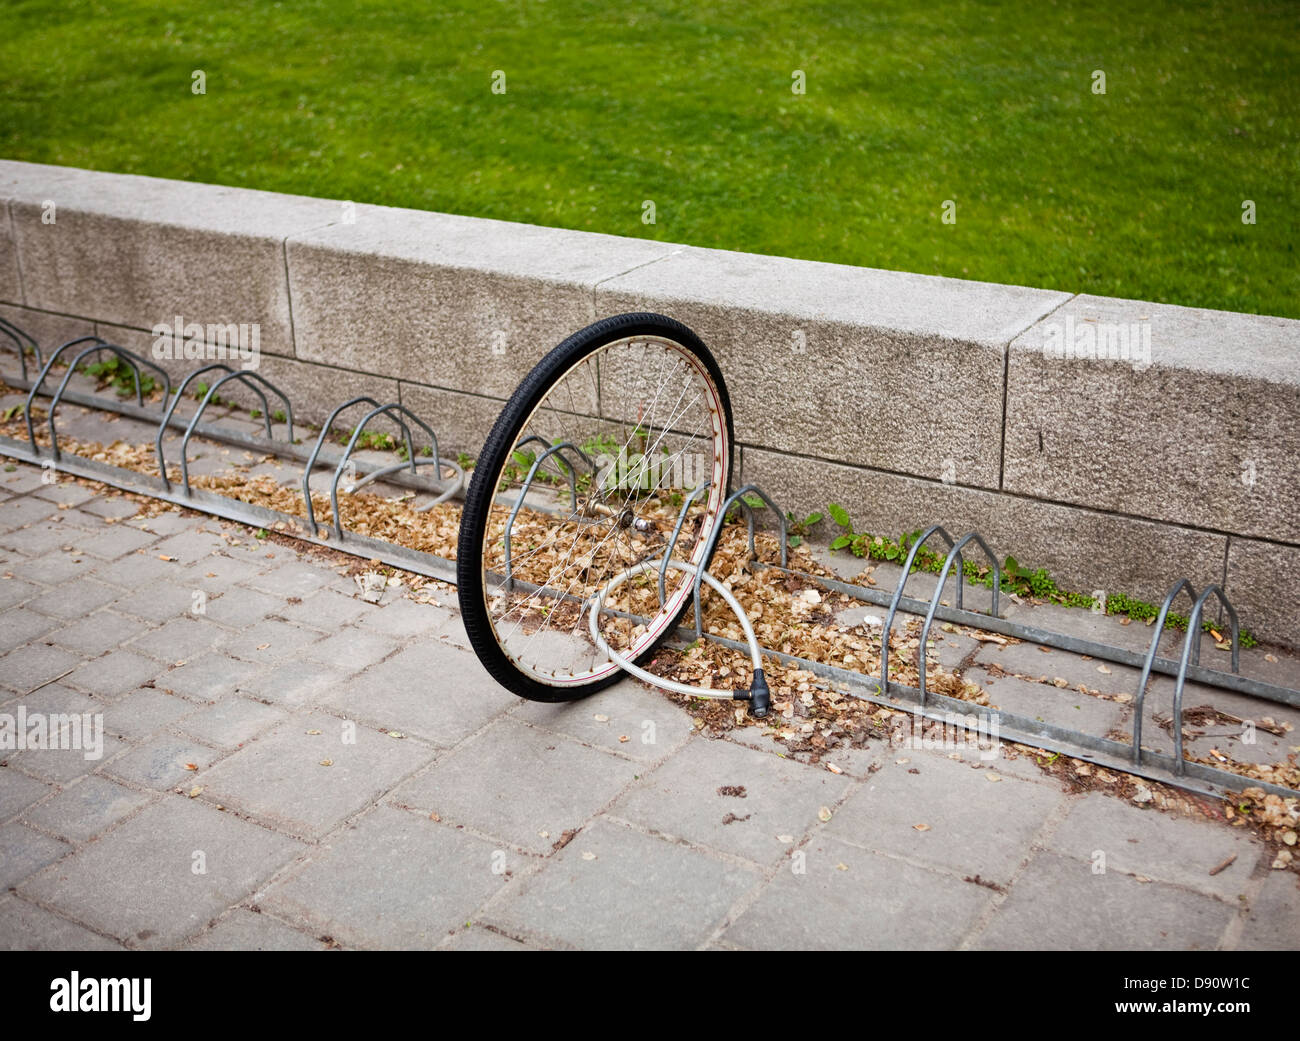 Bicycle wheel locked to bicycle stand Stock Photo